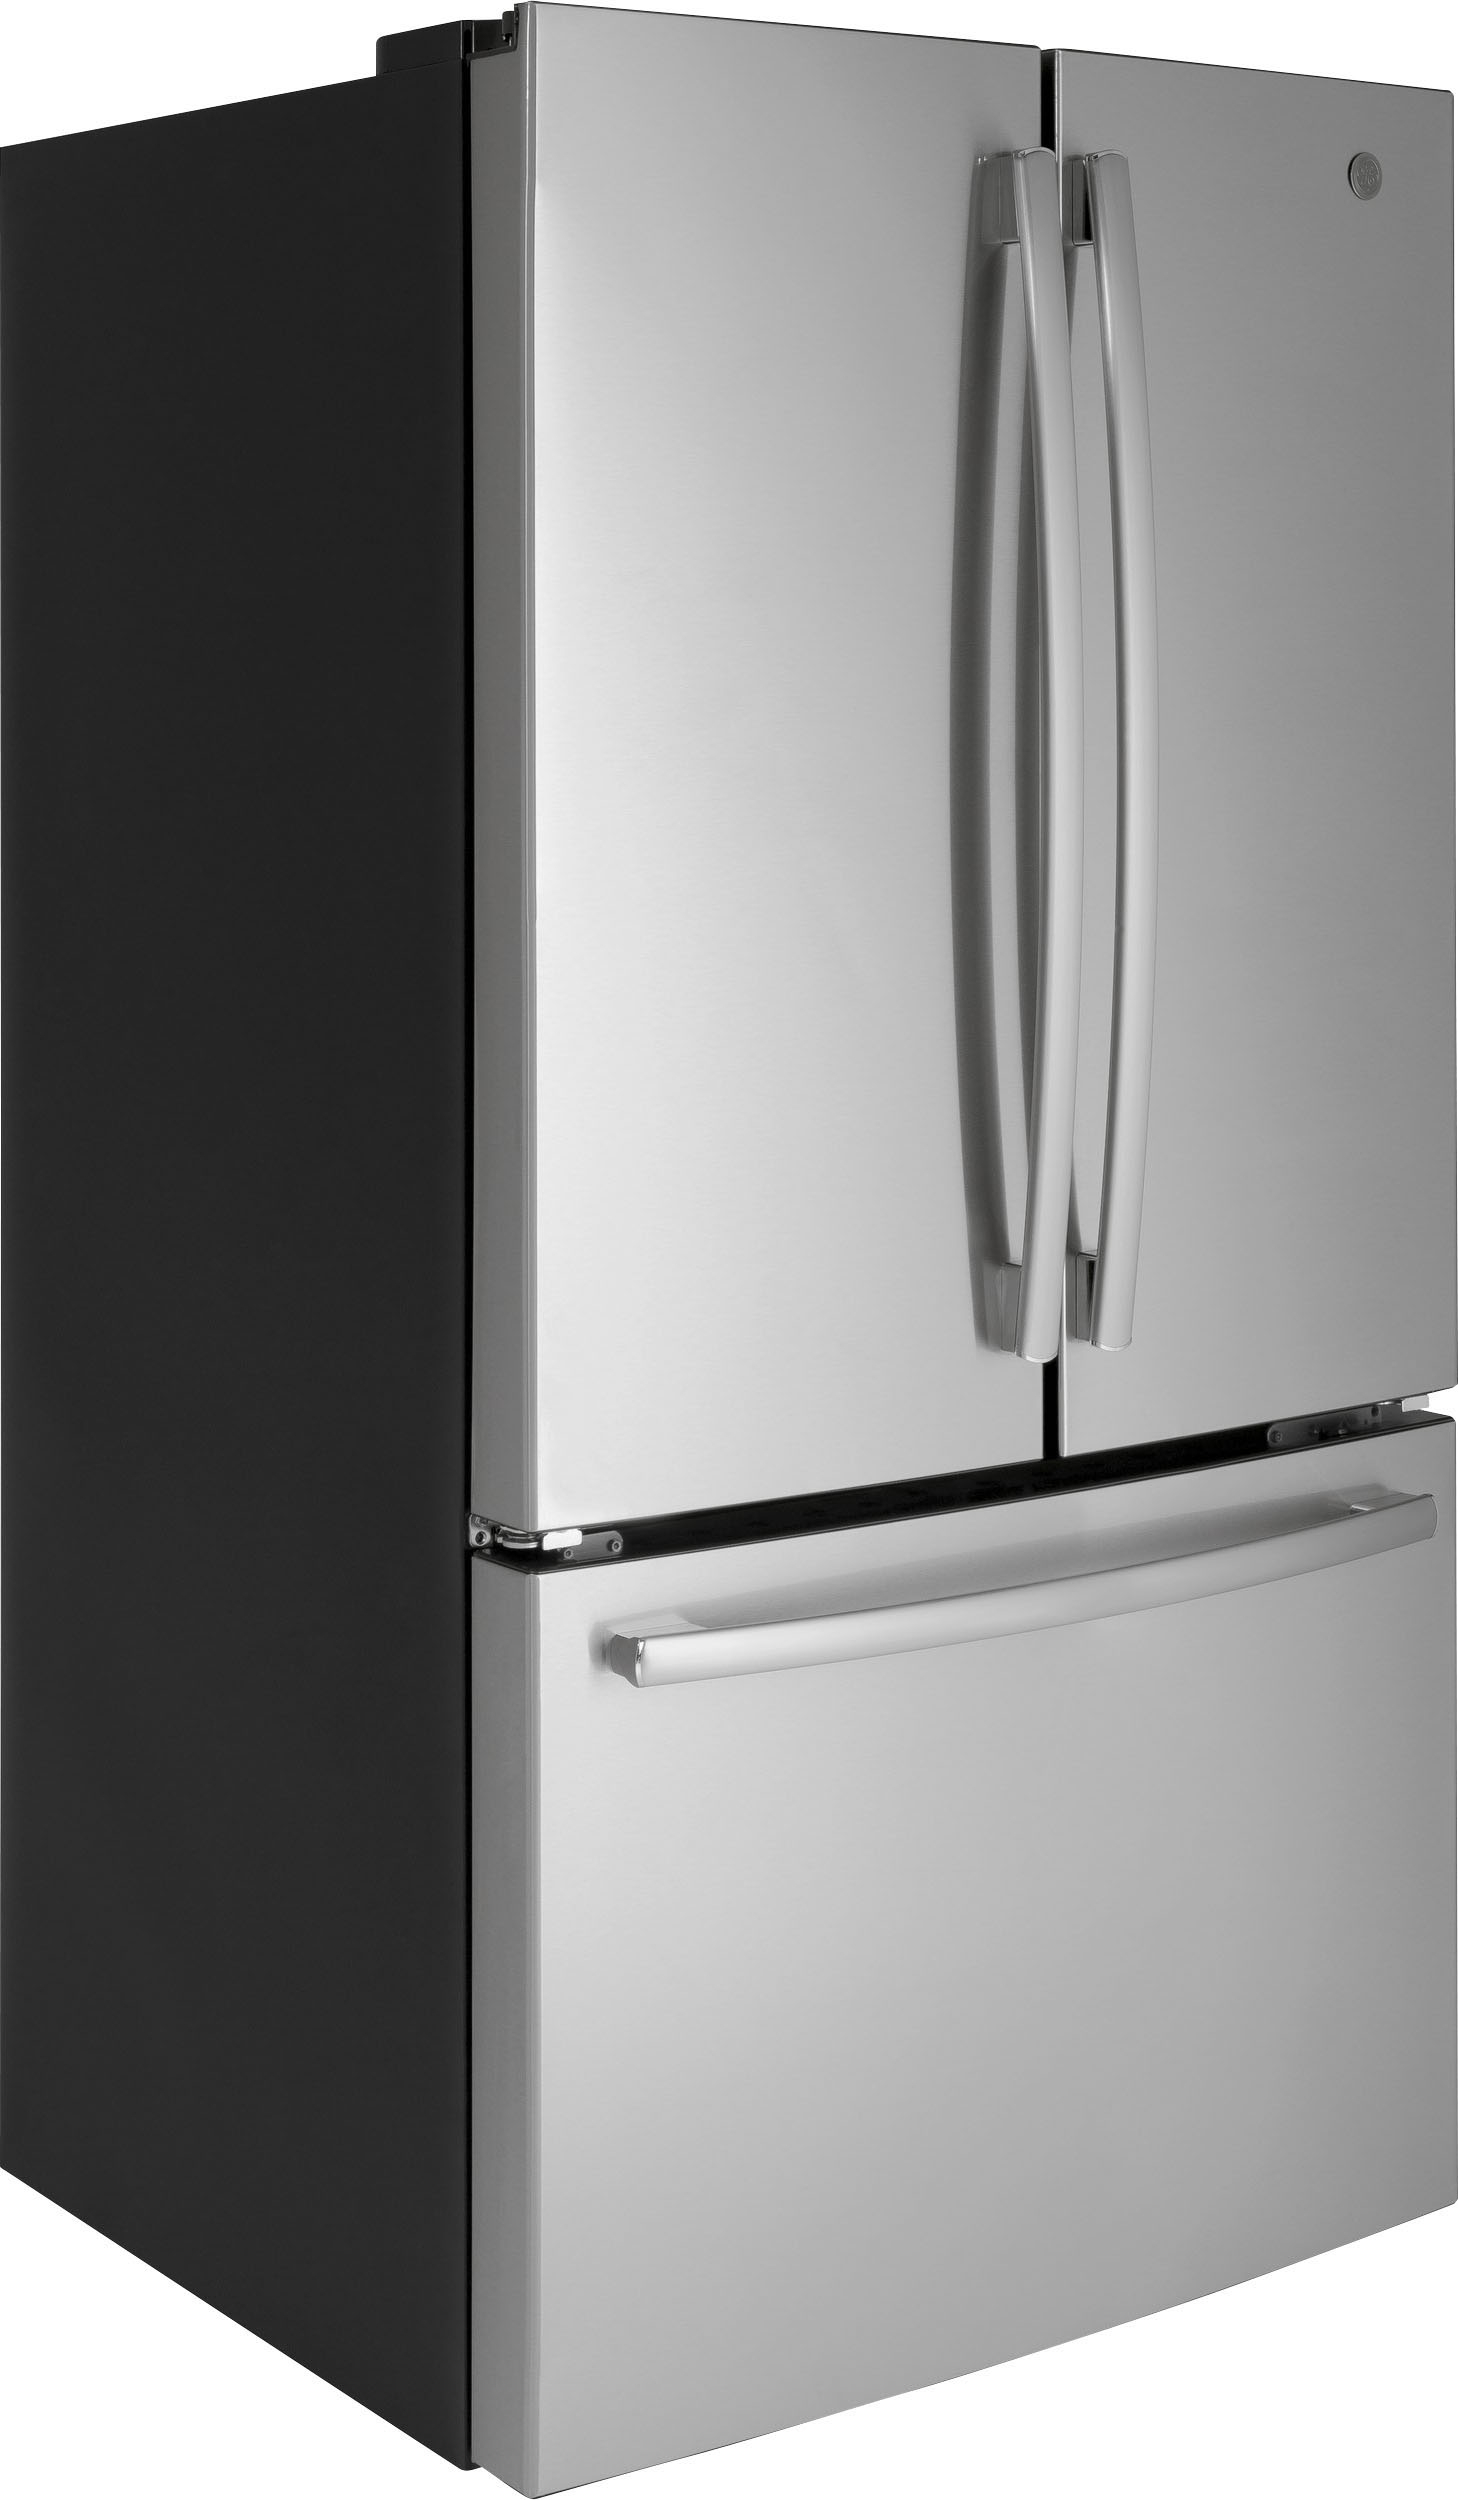 Angle View: GE - 27.0 Cu. Ft. French Door Refrigerator with Internal Water Dispenser - Stainless steel